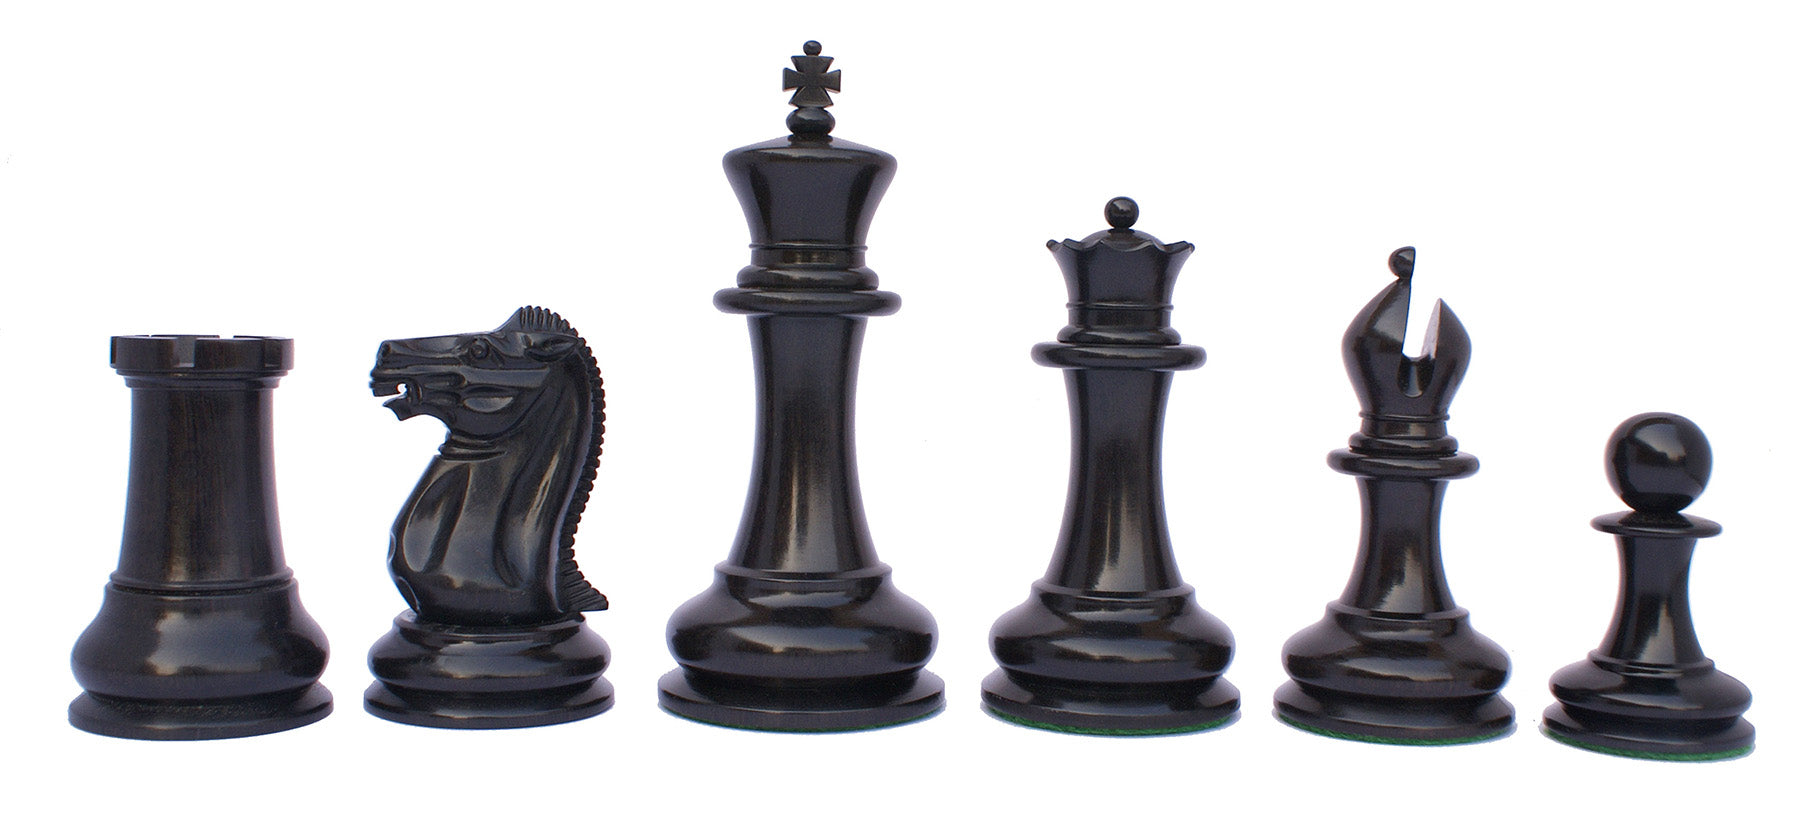 Jaques Reproduction 1870-75 Wooden Chess Pieces